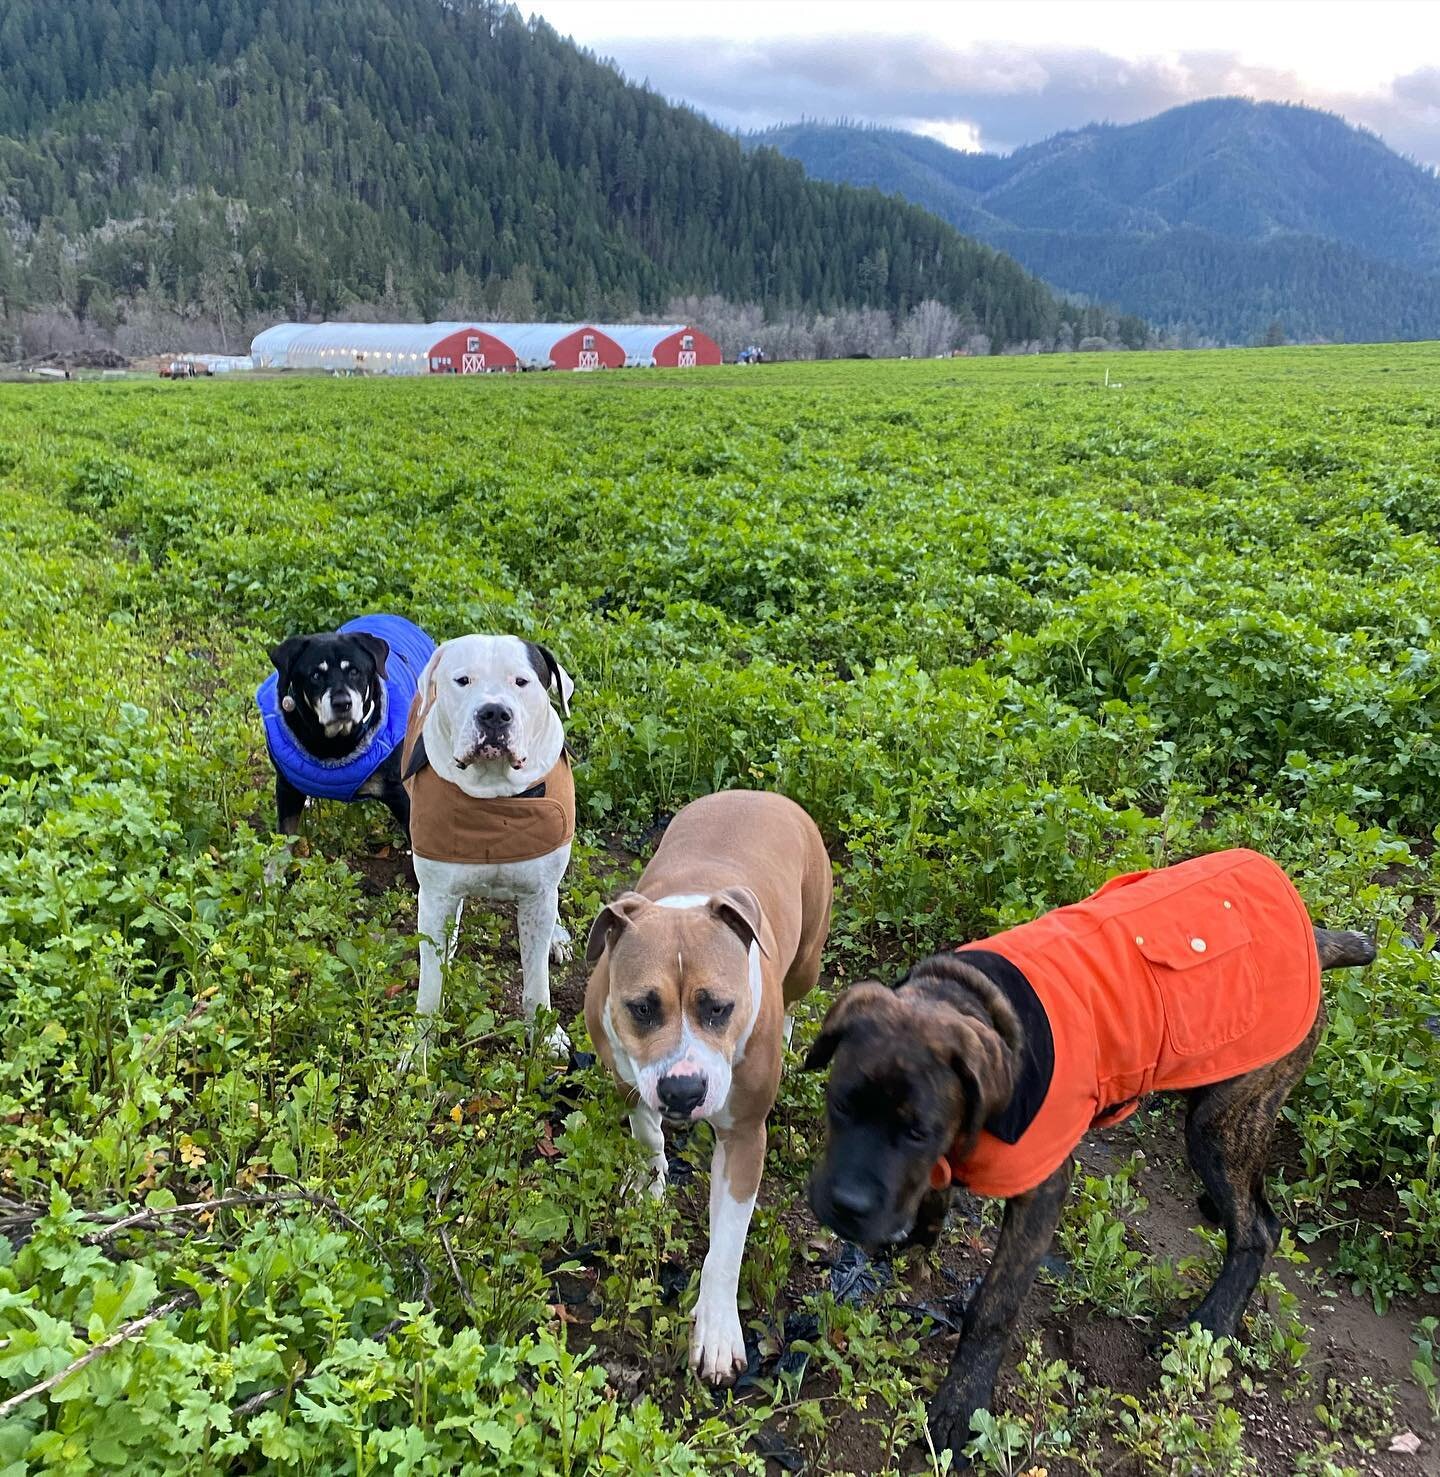 Pack walk yesterday 🐕🐕🐕

They were having a blast in the cover crop 🌱

All part of our full time crew, from left to right is Little Pup, Romeo, Hazel, and Hugo.

#dogsofcannabis #hempdog #cbddogs #farmdoglife #farmdog #cbdfarm